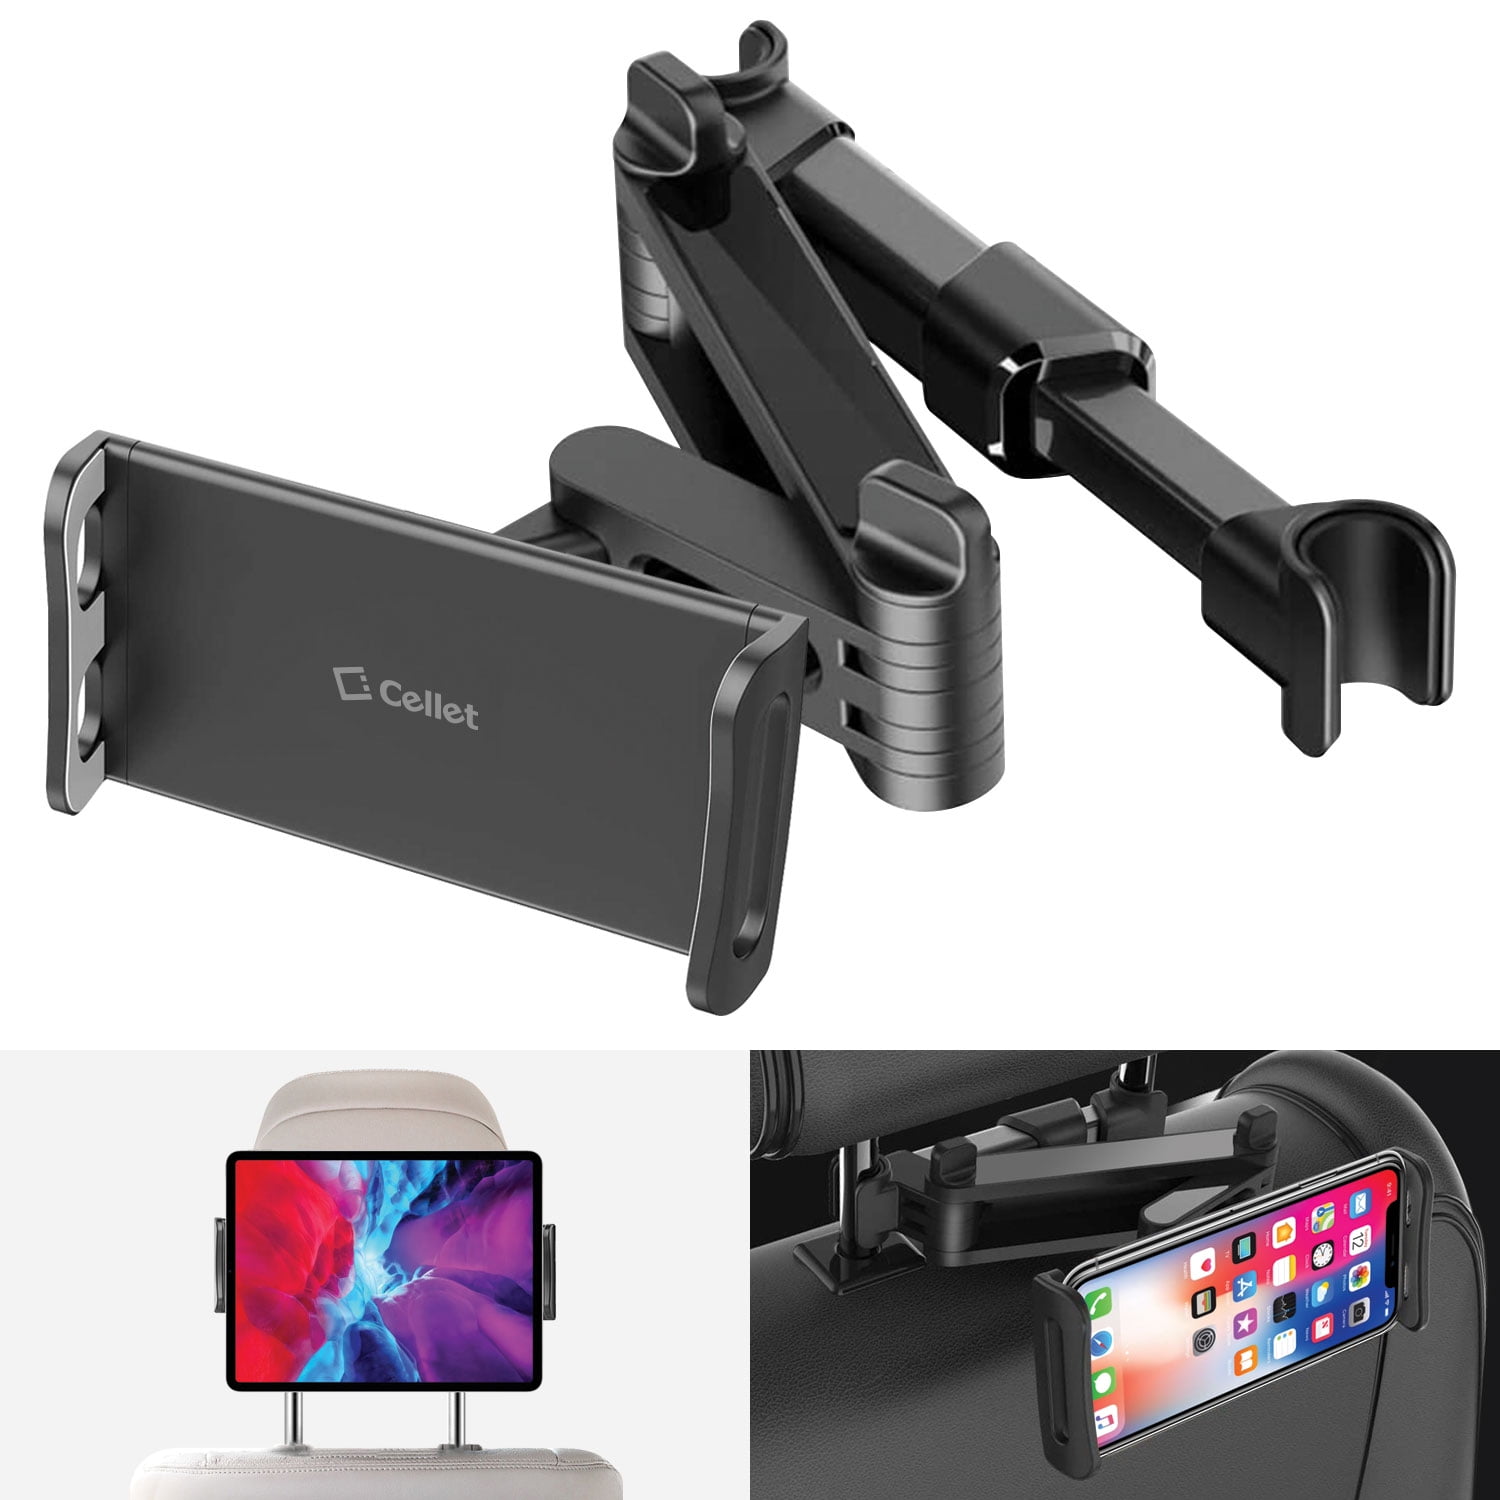 2 in 1 360 Degree Rotation Premium Center Car Seat Headrest Mount with Universal Tablet Fits All Under 10 inch Screens Smartphone Cradle Holder for iPad Pro 9.7 ipad Air iPad Mini 